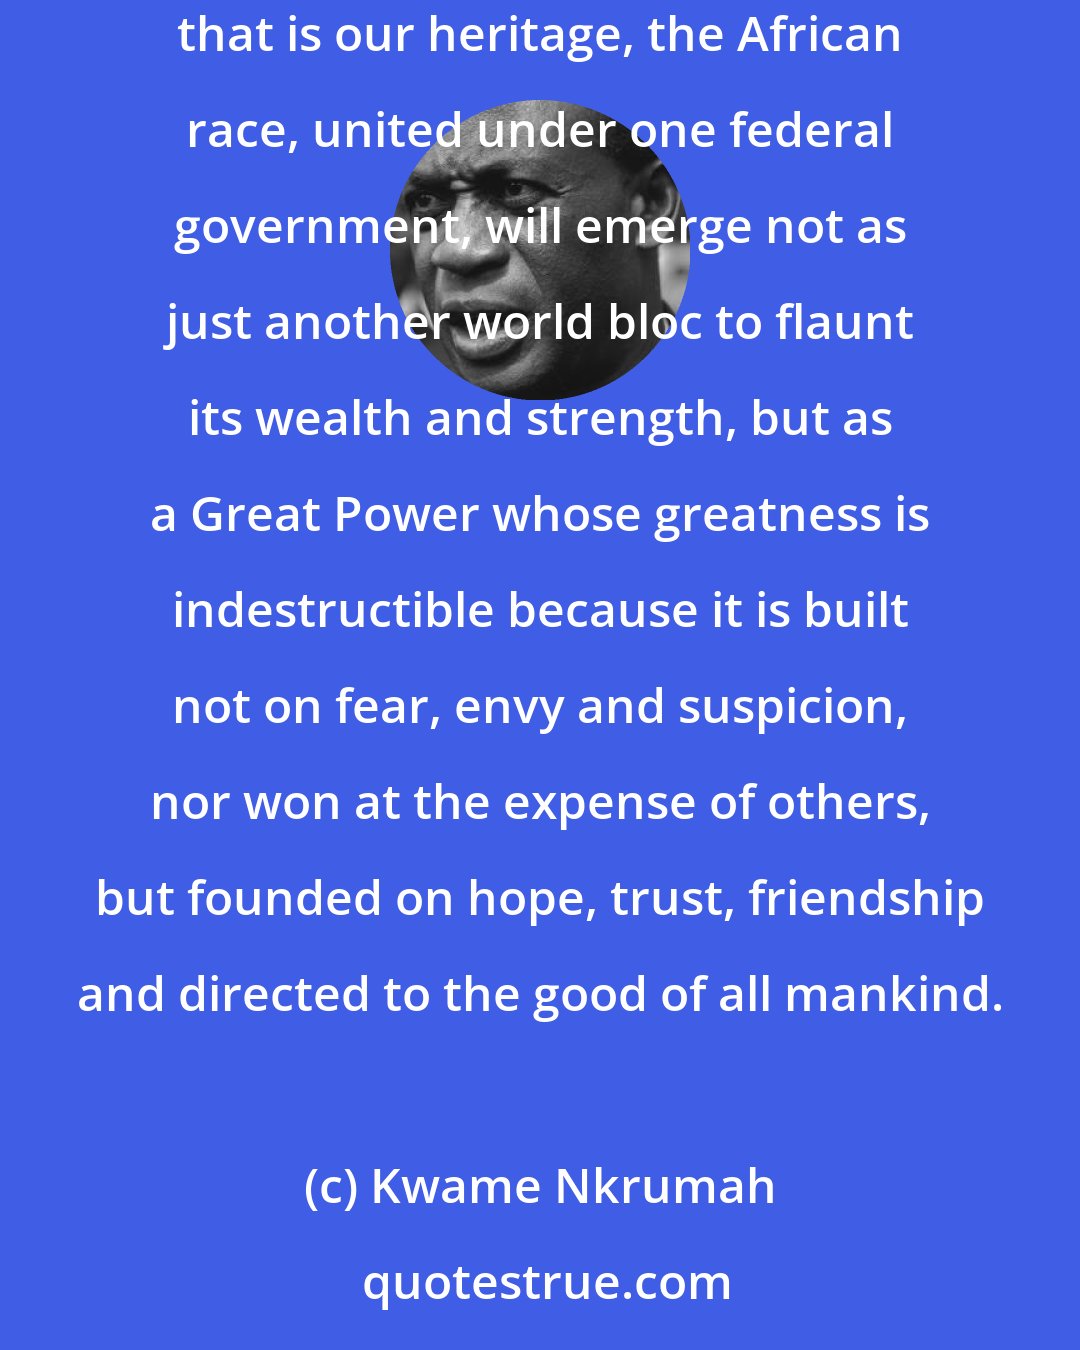 Kwame Nkrumah: I believe strongly and sincerely that with the deep-rooted wisdom and dignity, the innate respect for human lives, the intense humanity that is our heritage, the African race, united under one federal government, will emerge not as just another world bloc to flaunt its wealth and strength, but as a Great Power whose greatness is indestructible because it is built not on fear, envy and suspicion, nor won at the expense of others, but founded on hope, trust, friendship and directed to the good of all mankind.